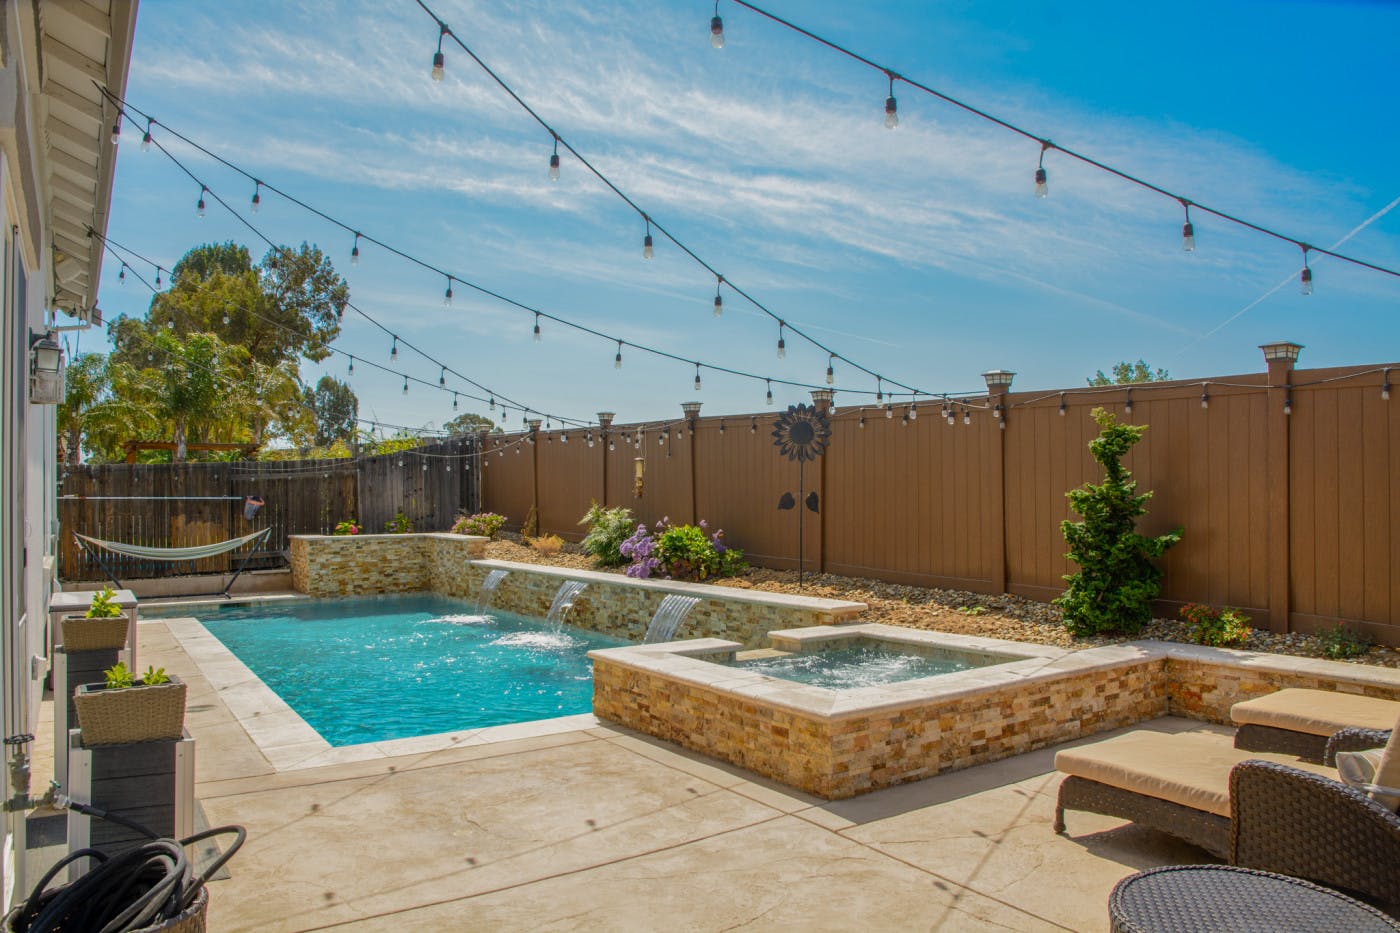 Summer Oasis - Rent a private pool in Oakley, California - Swimply